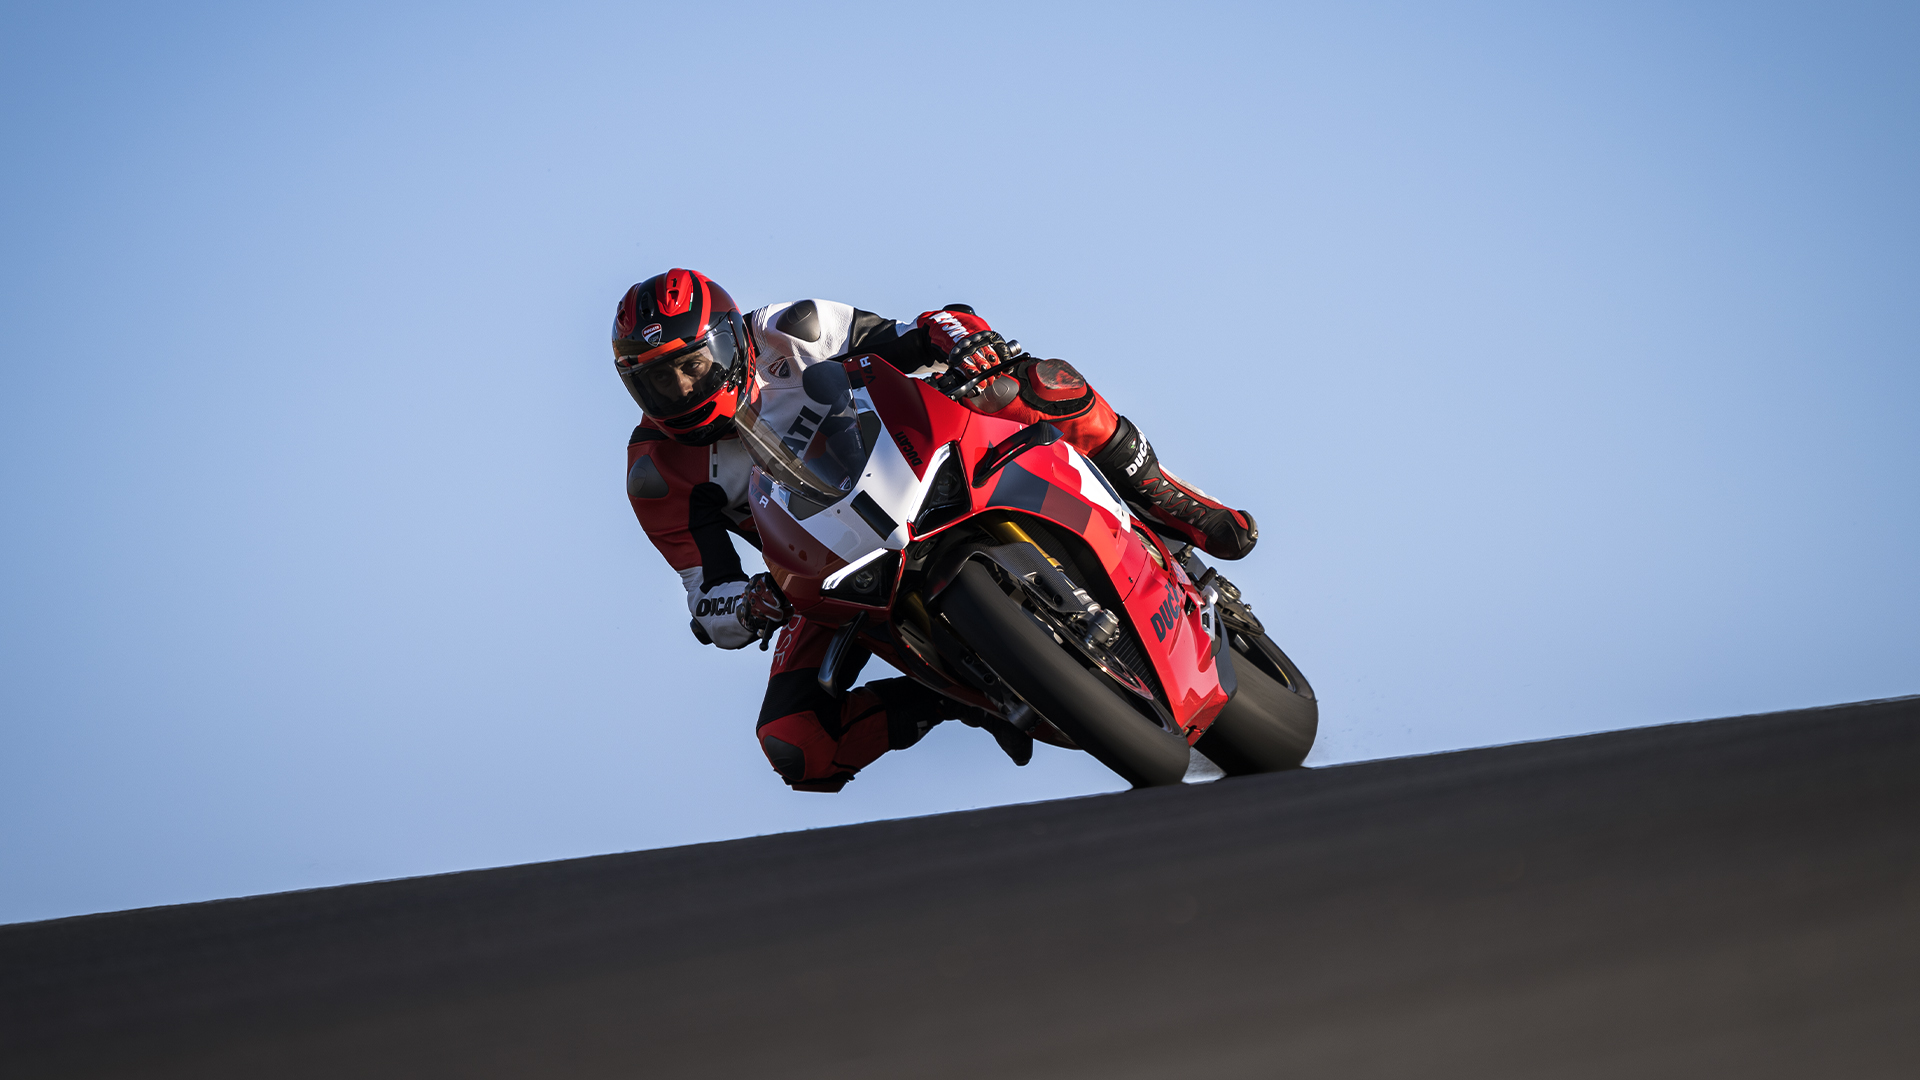 Ducati-Panigale-V4R-MY23-overview-gallery-01-1920x1080